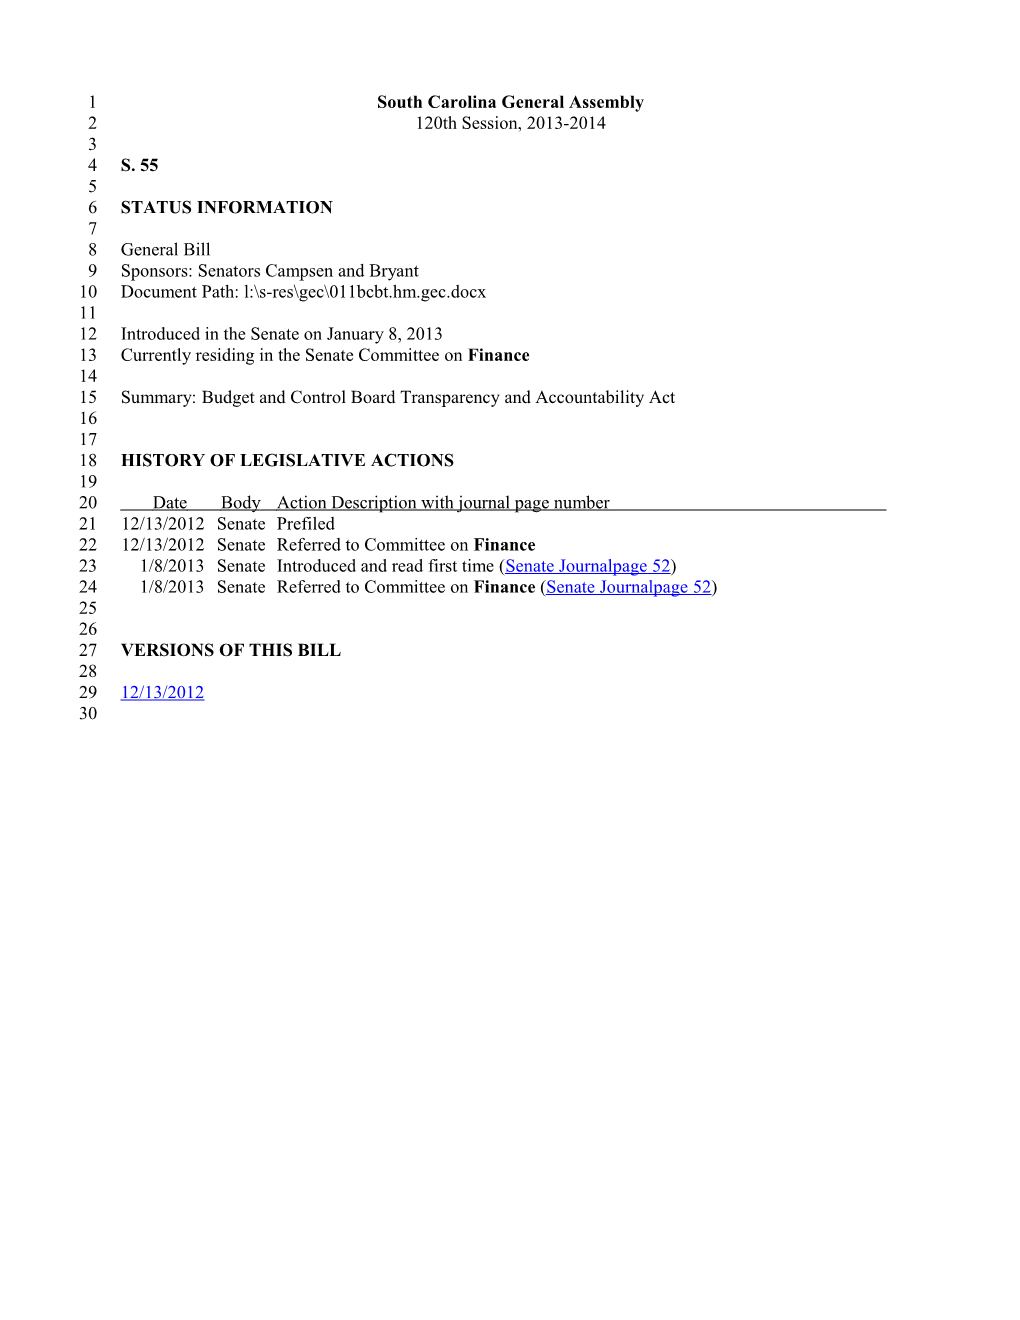 2013-2014 Bill 55: Budget and Control Board Transparency and Accountability Act - South